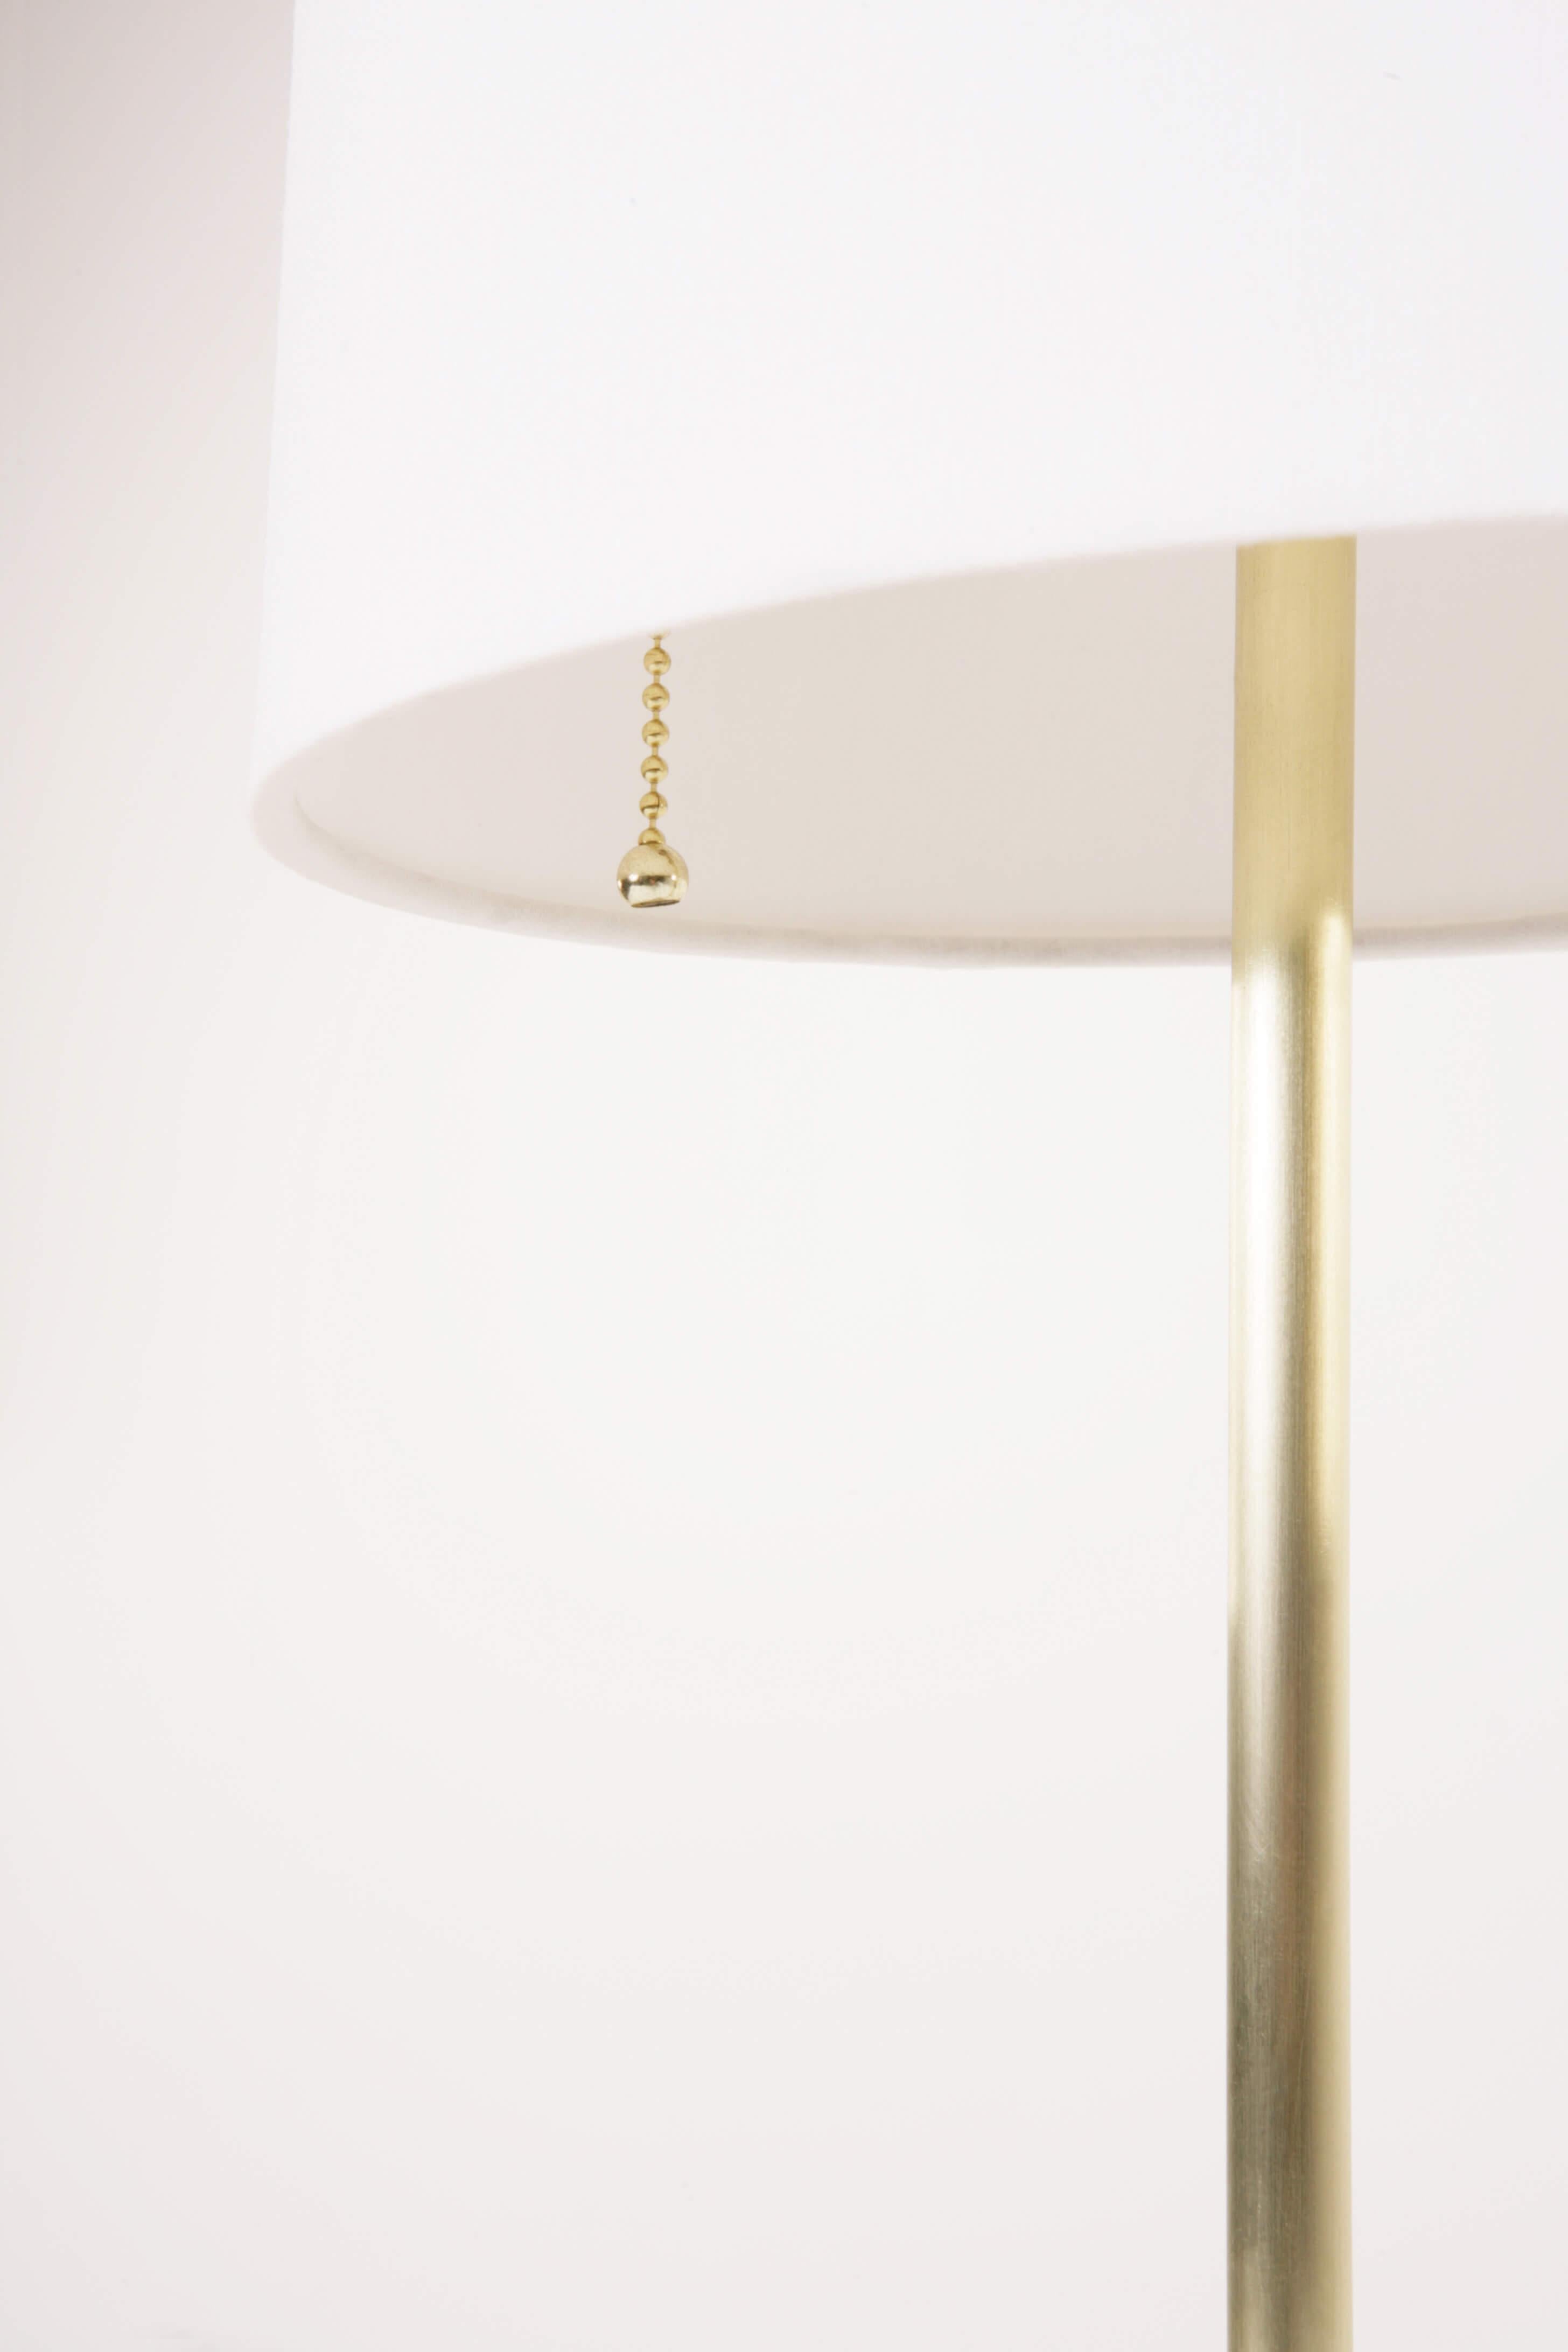 Forge Table Lamp in Solid Brass with Off-White Silk/Linen Blend Fabric Shade (Moderne der Mitte des Jahrhunderts)